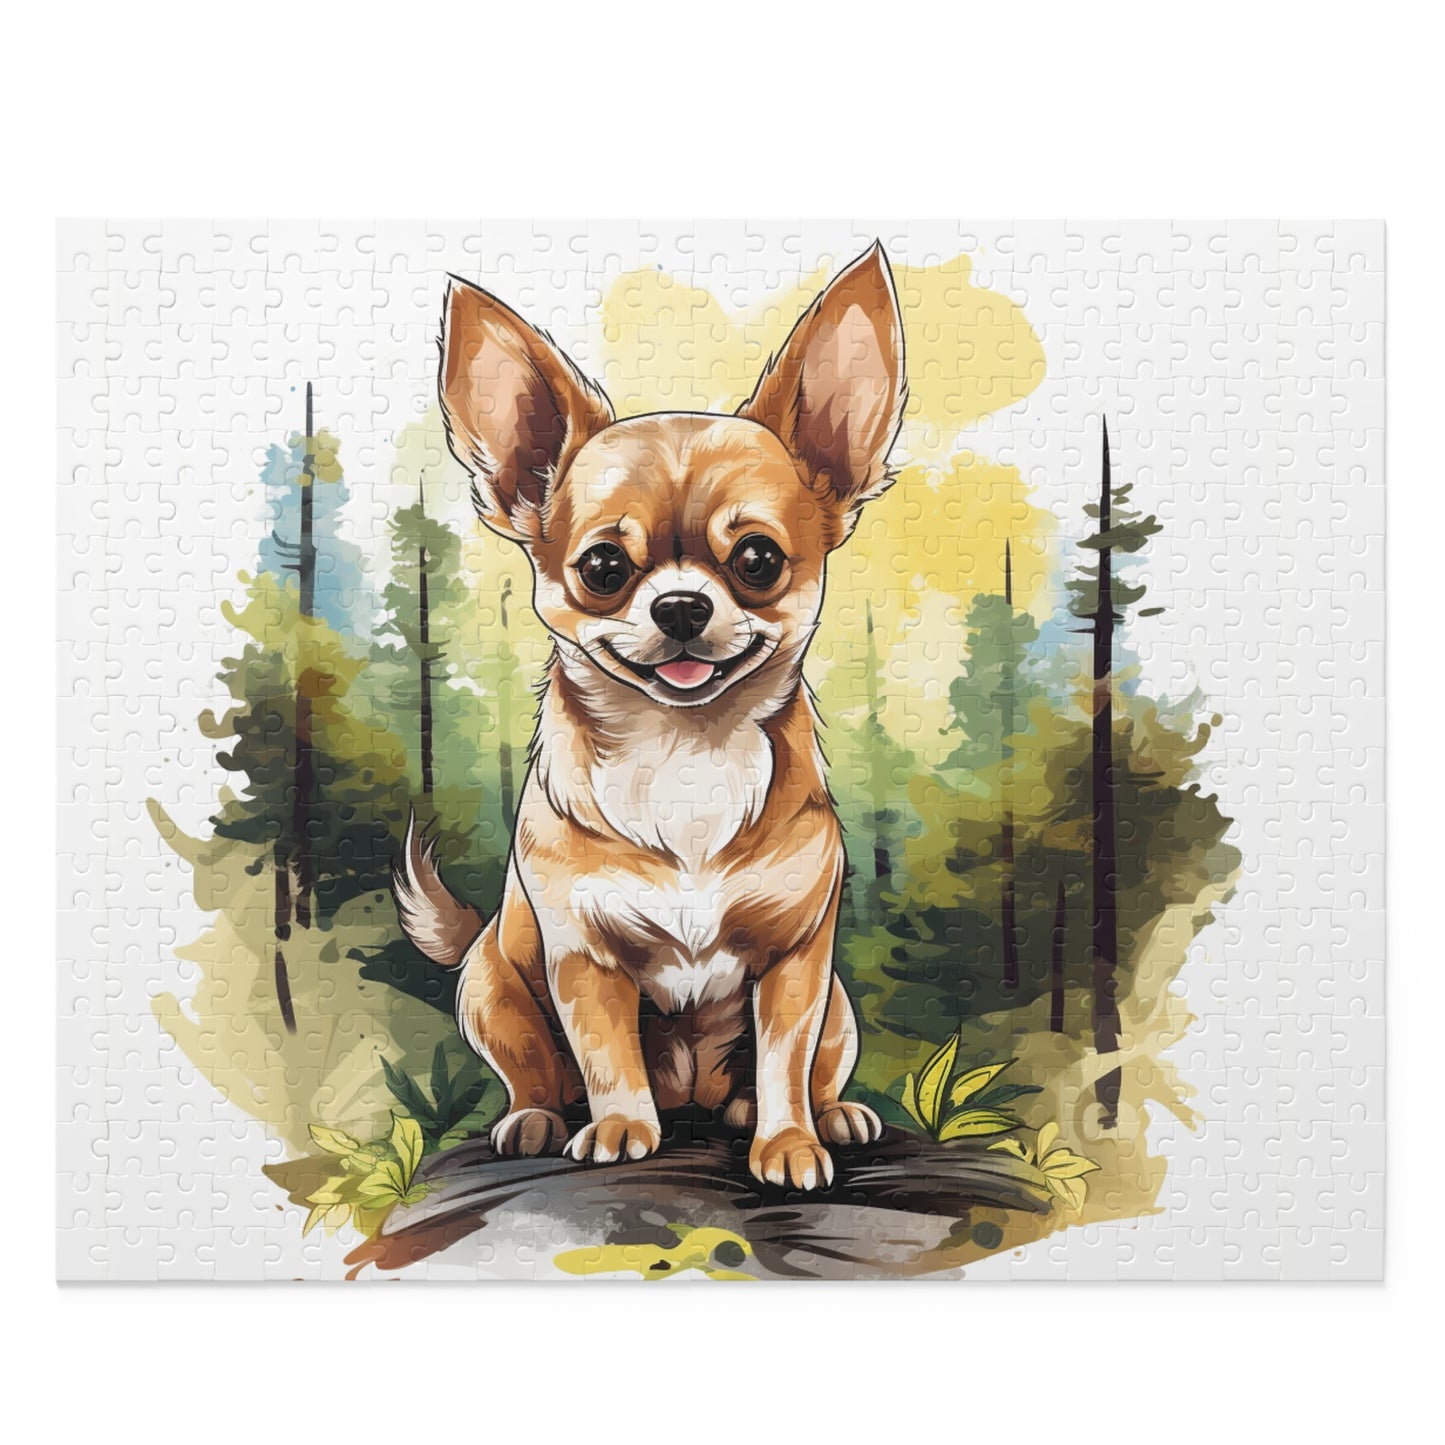 Smiles of a Chihuahua 500 Piece Puzzle